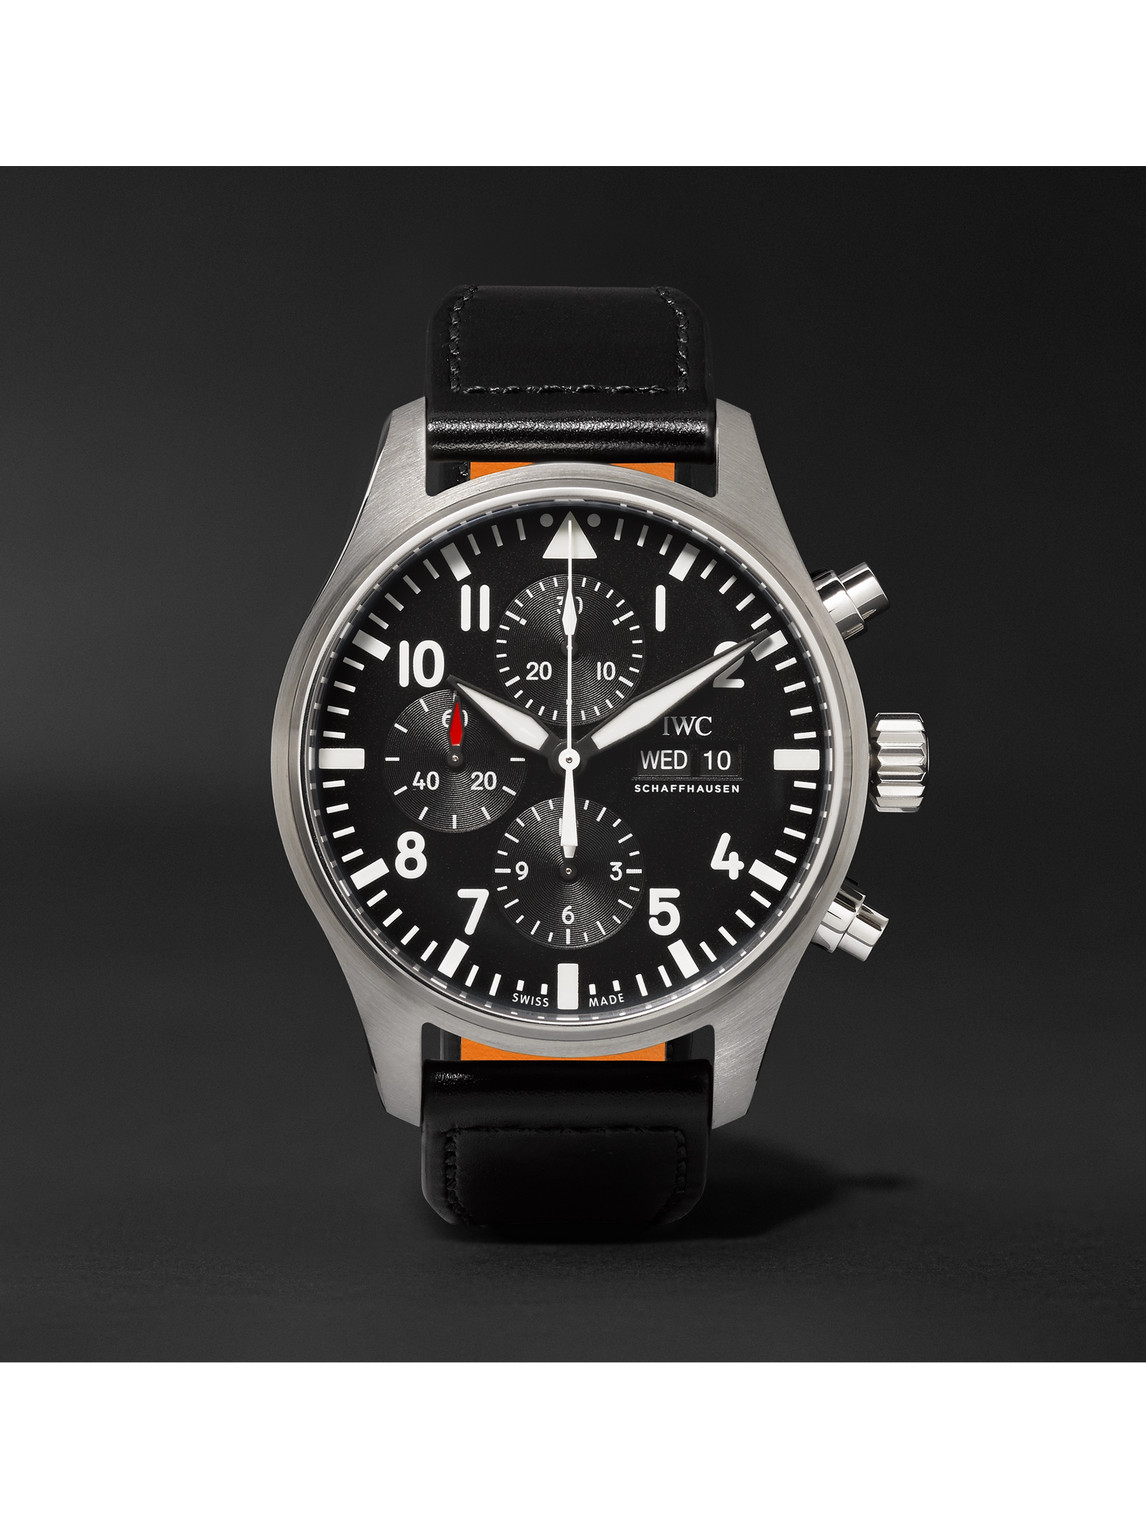 Pilot's Automatic Chronograph 43mm Stainless Steel and Leather Watch, Ref. No. IW377709